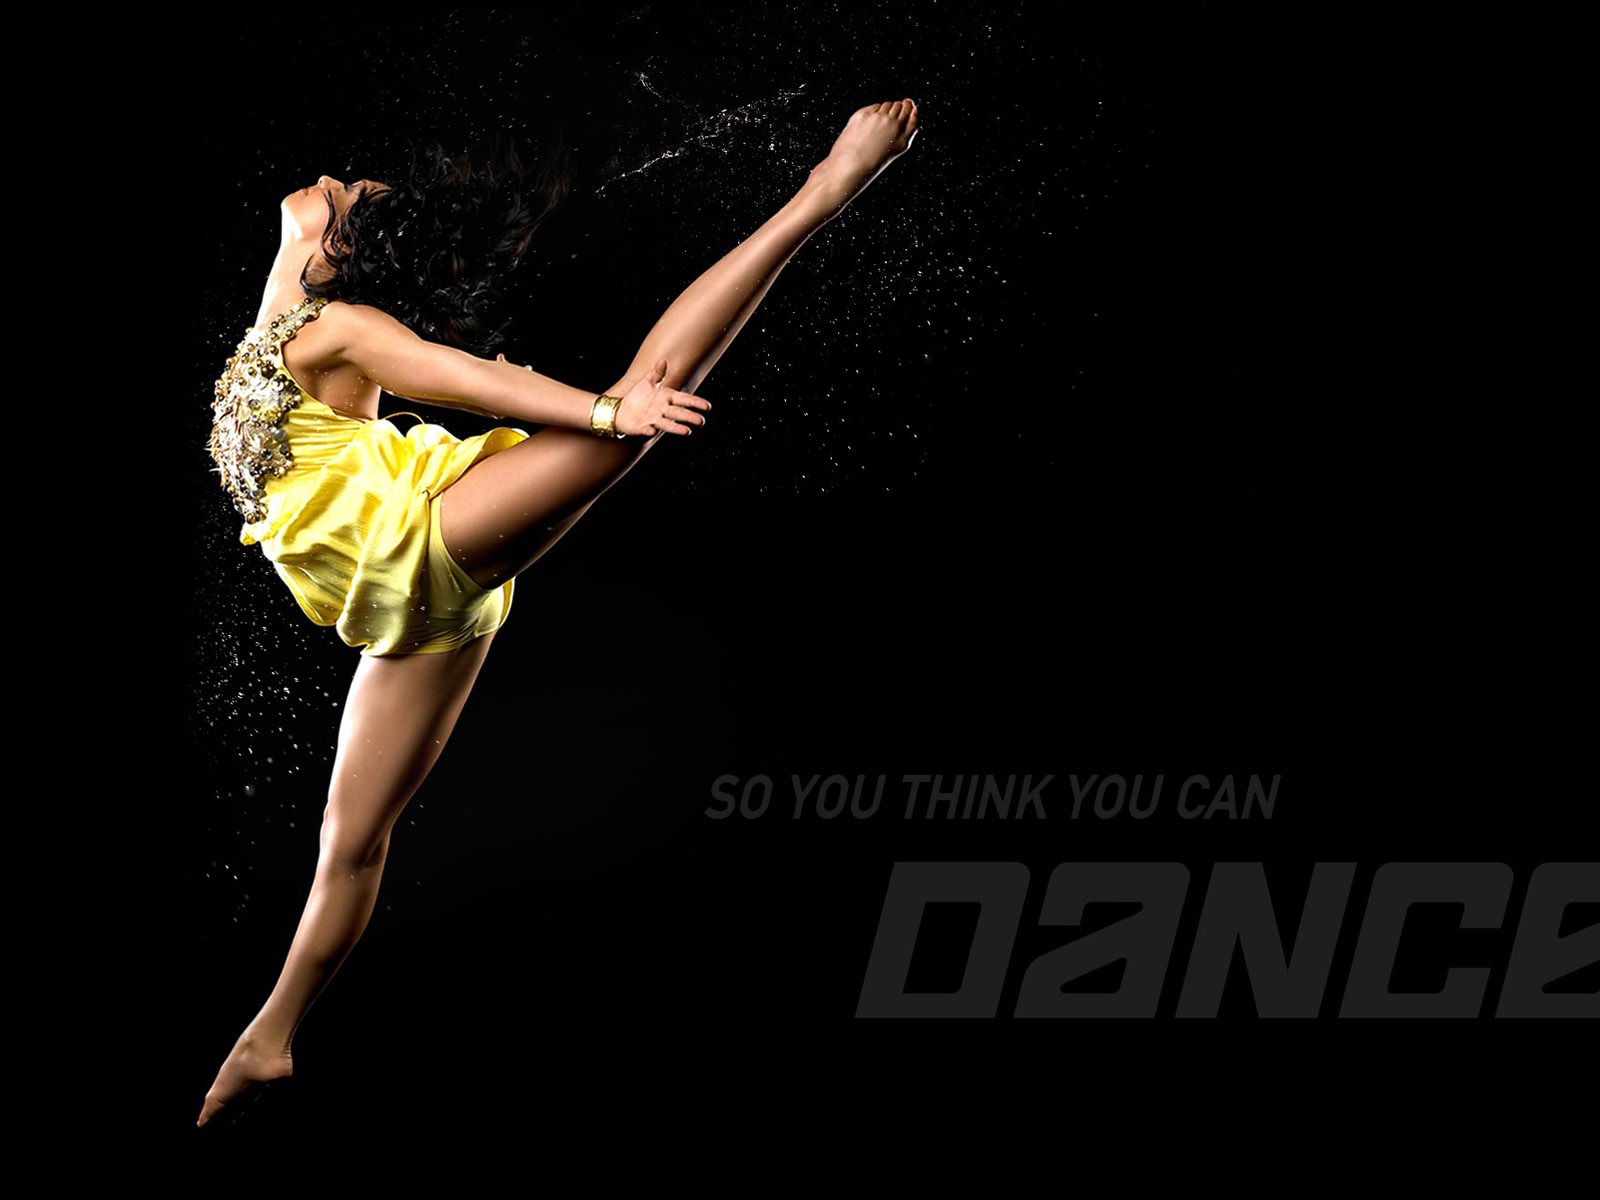 So You Think You Can Dance wallpaper (1) #19 - 1600x1200